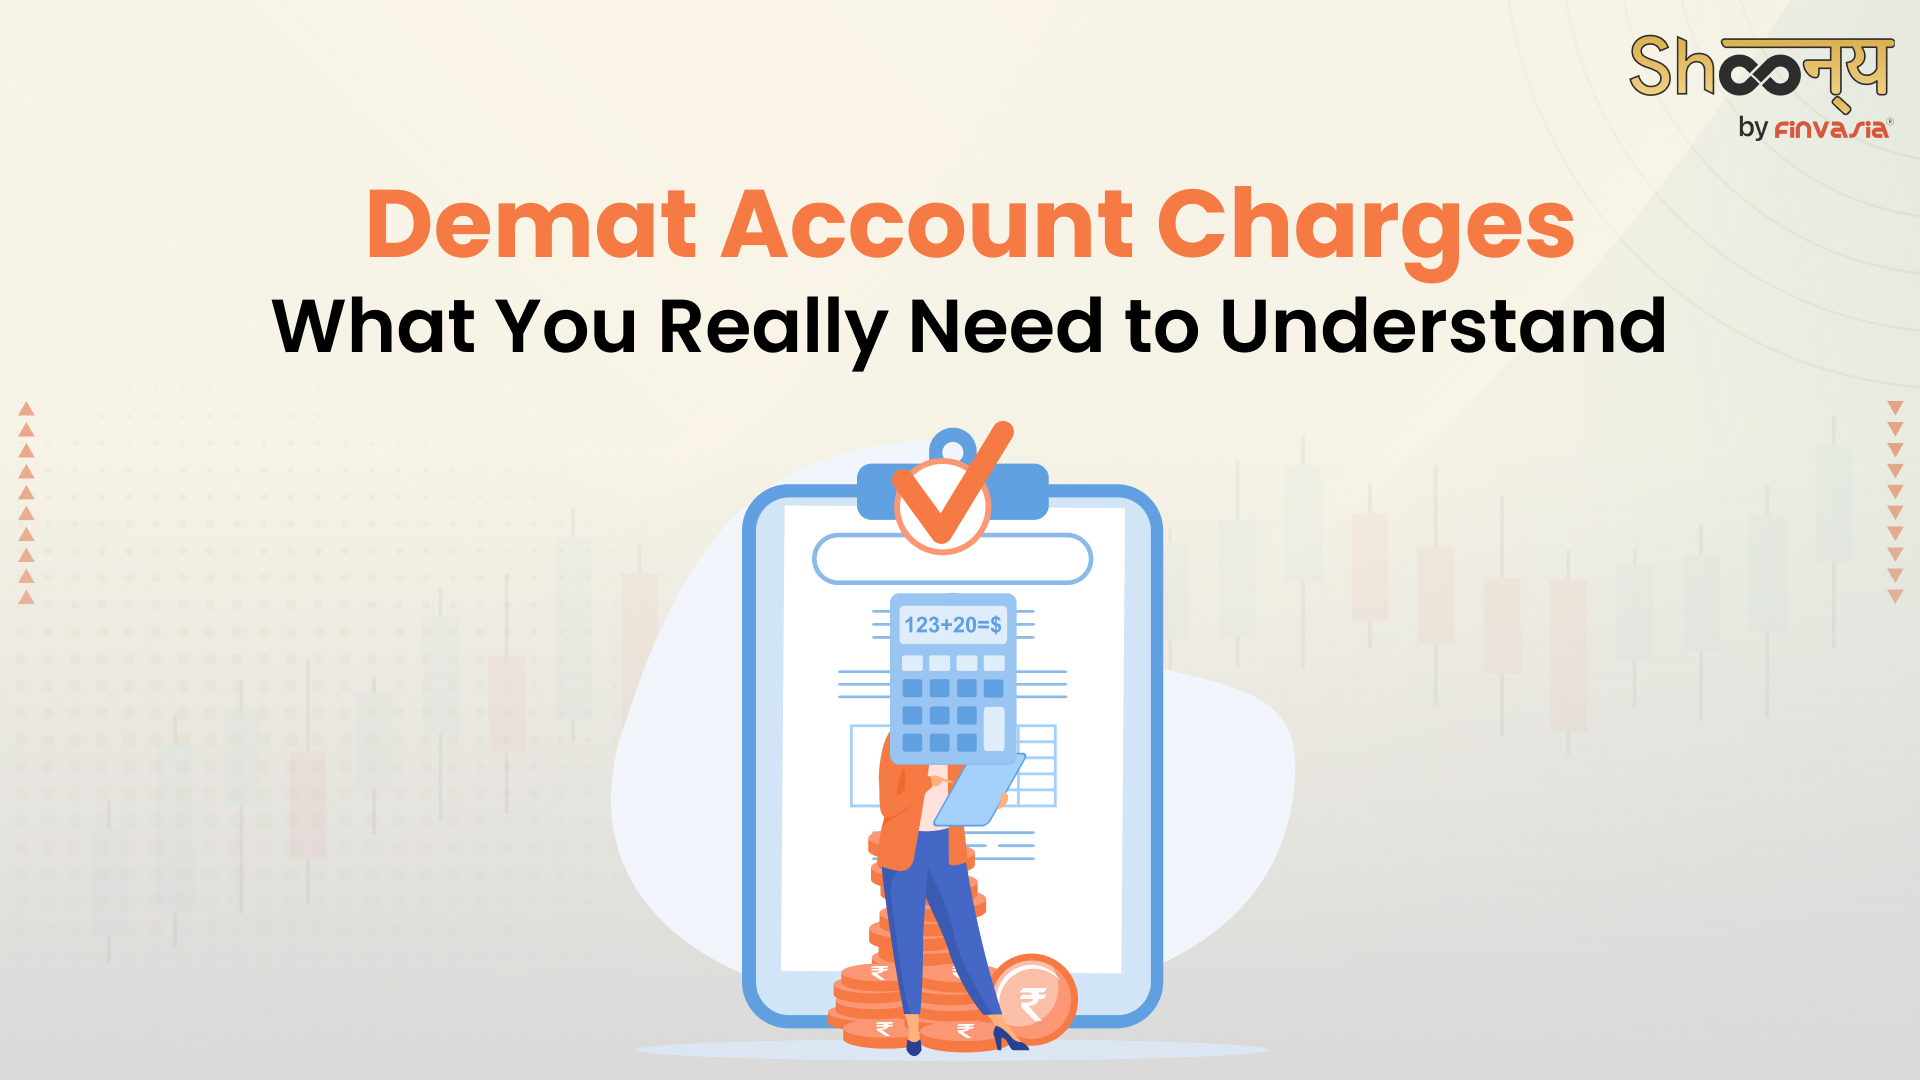 What are the Various Demat Account Charges in India?